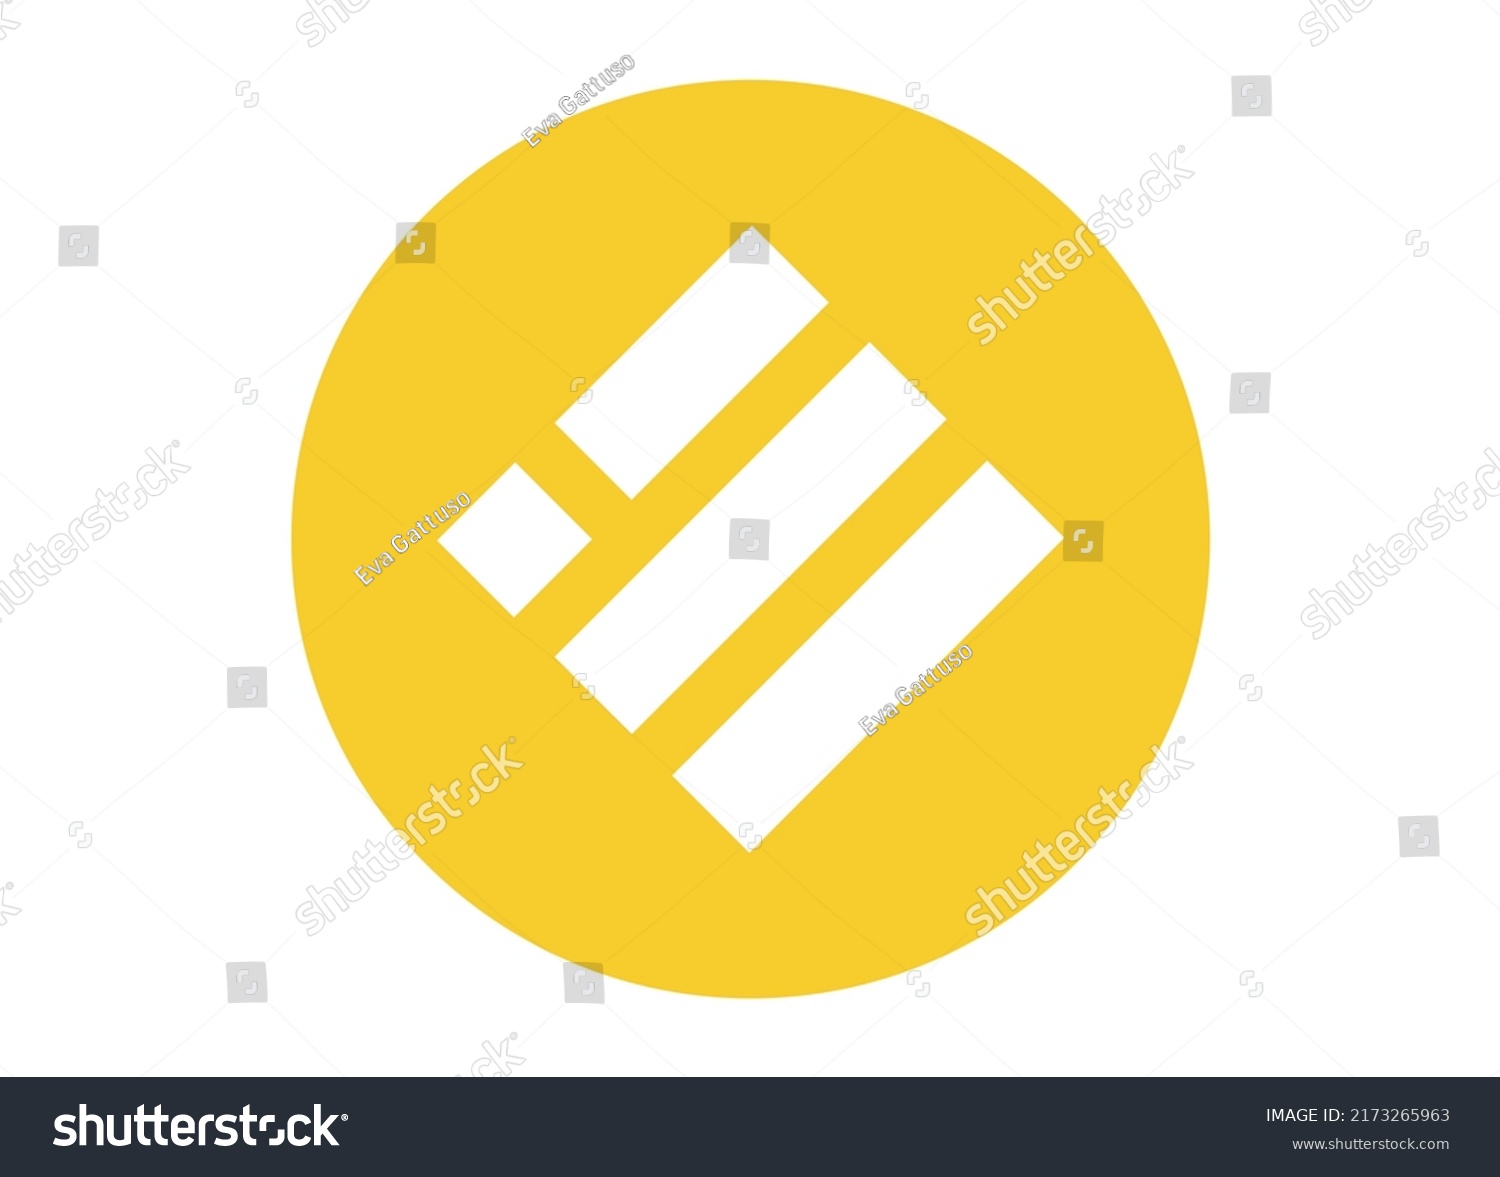 SVG of BUSD currency Icon. Flat design. Concept of crypto currency and blockchain.
 svg